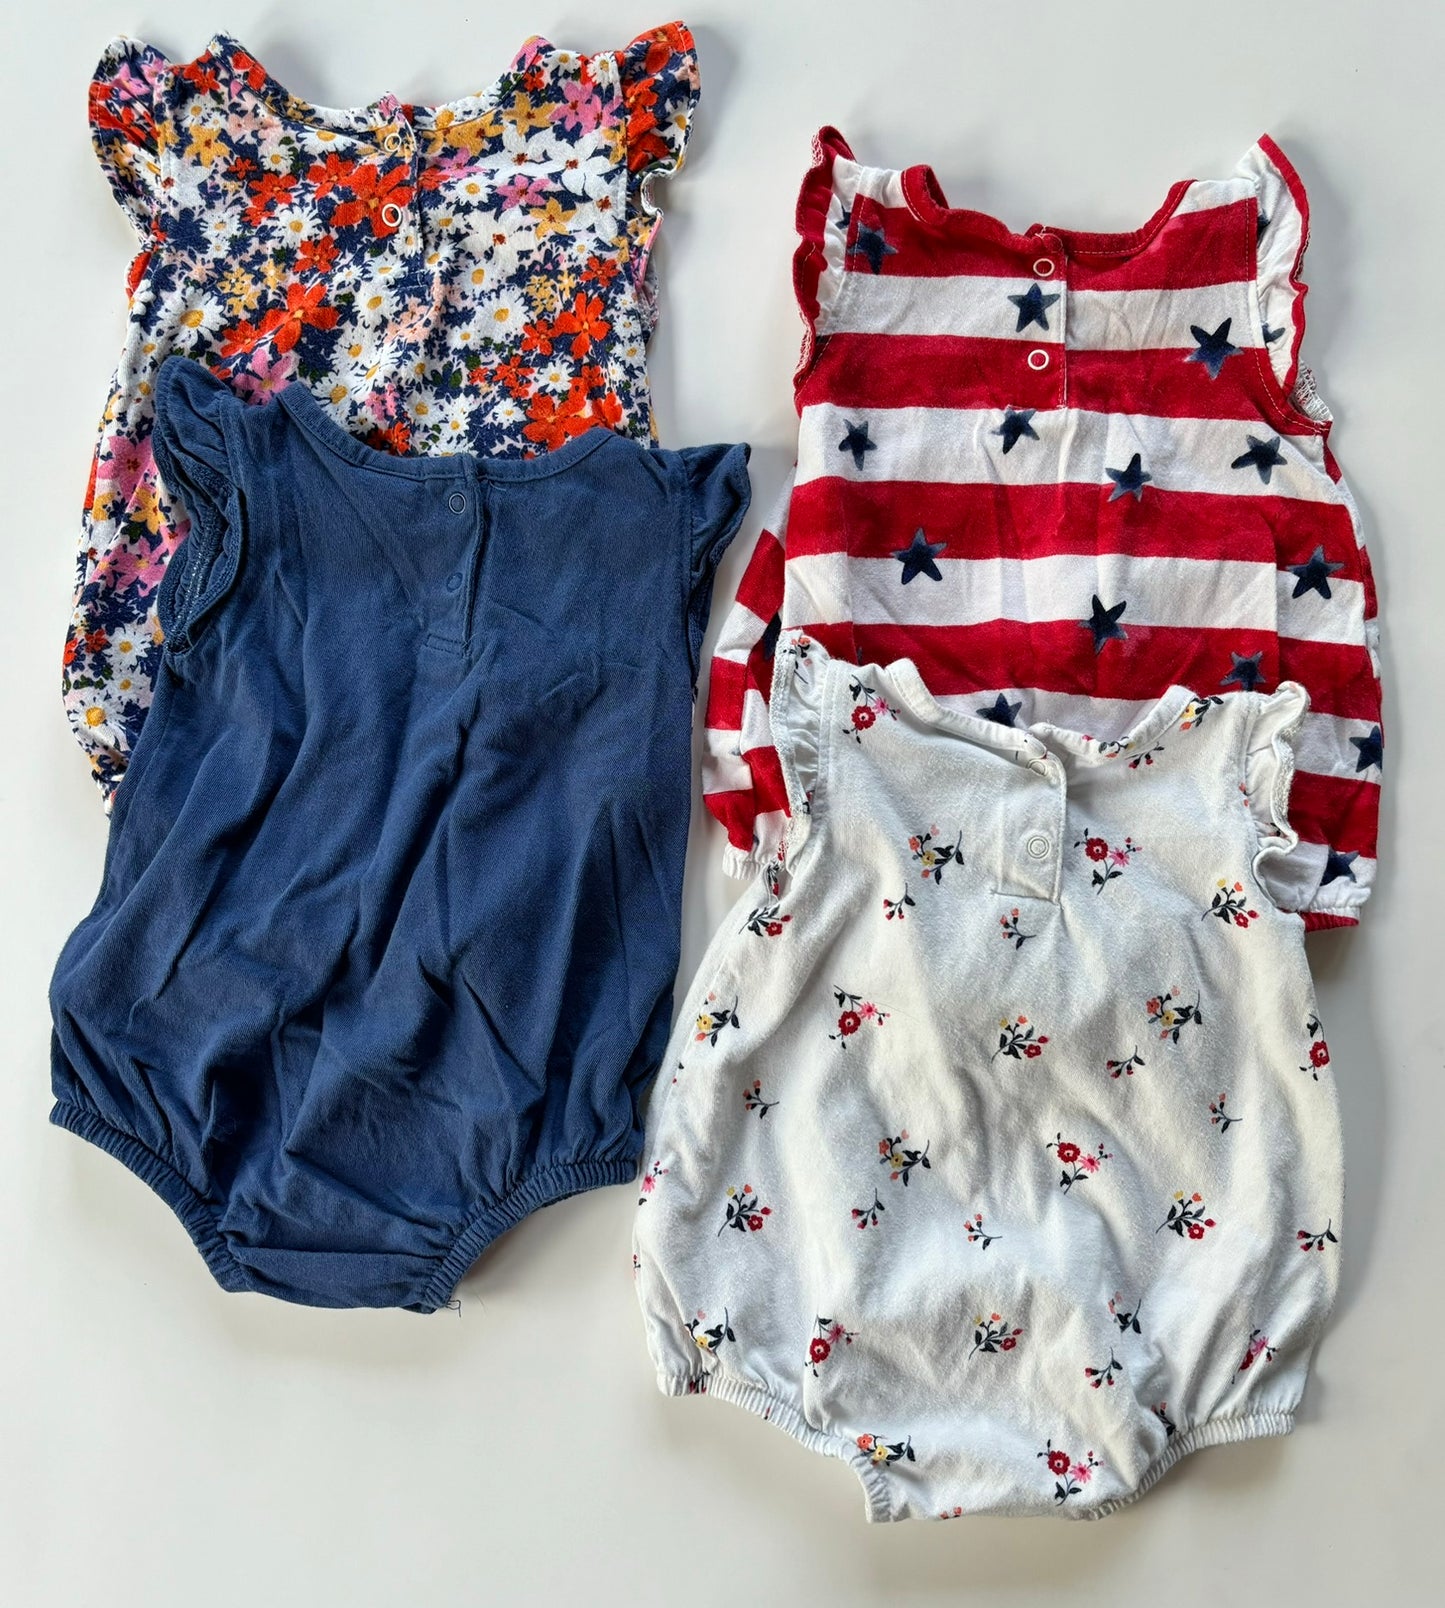 Girls 0-3 Month Old Navy Sleeveless Ruffle Shoulder One-Piece Bubble Romper Bundle - Floral Blue + Red + White